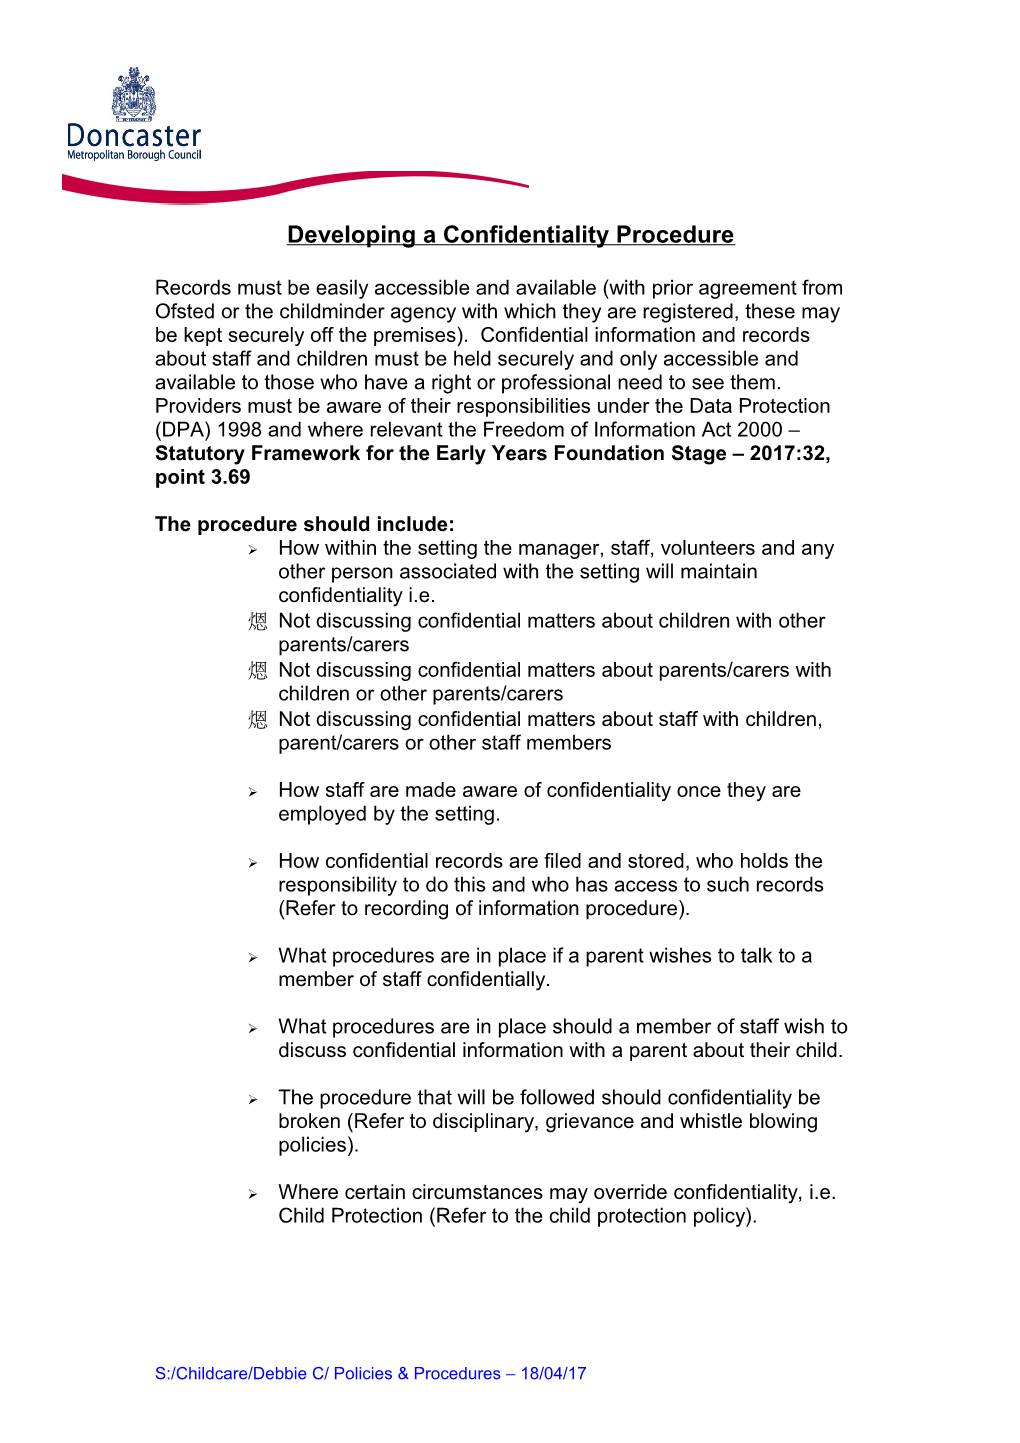 Developing a Confidentiality Procedure